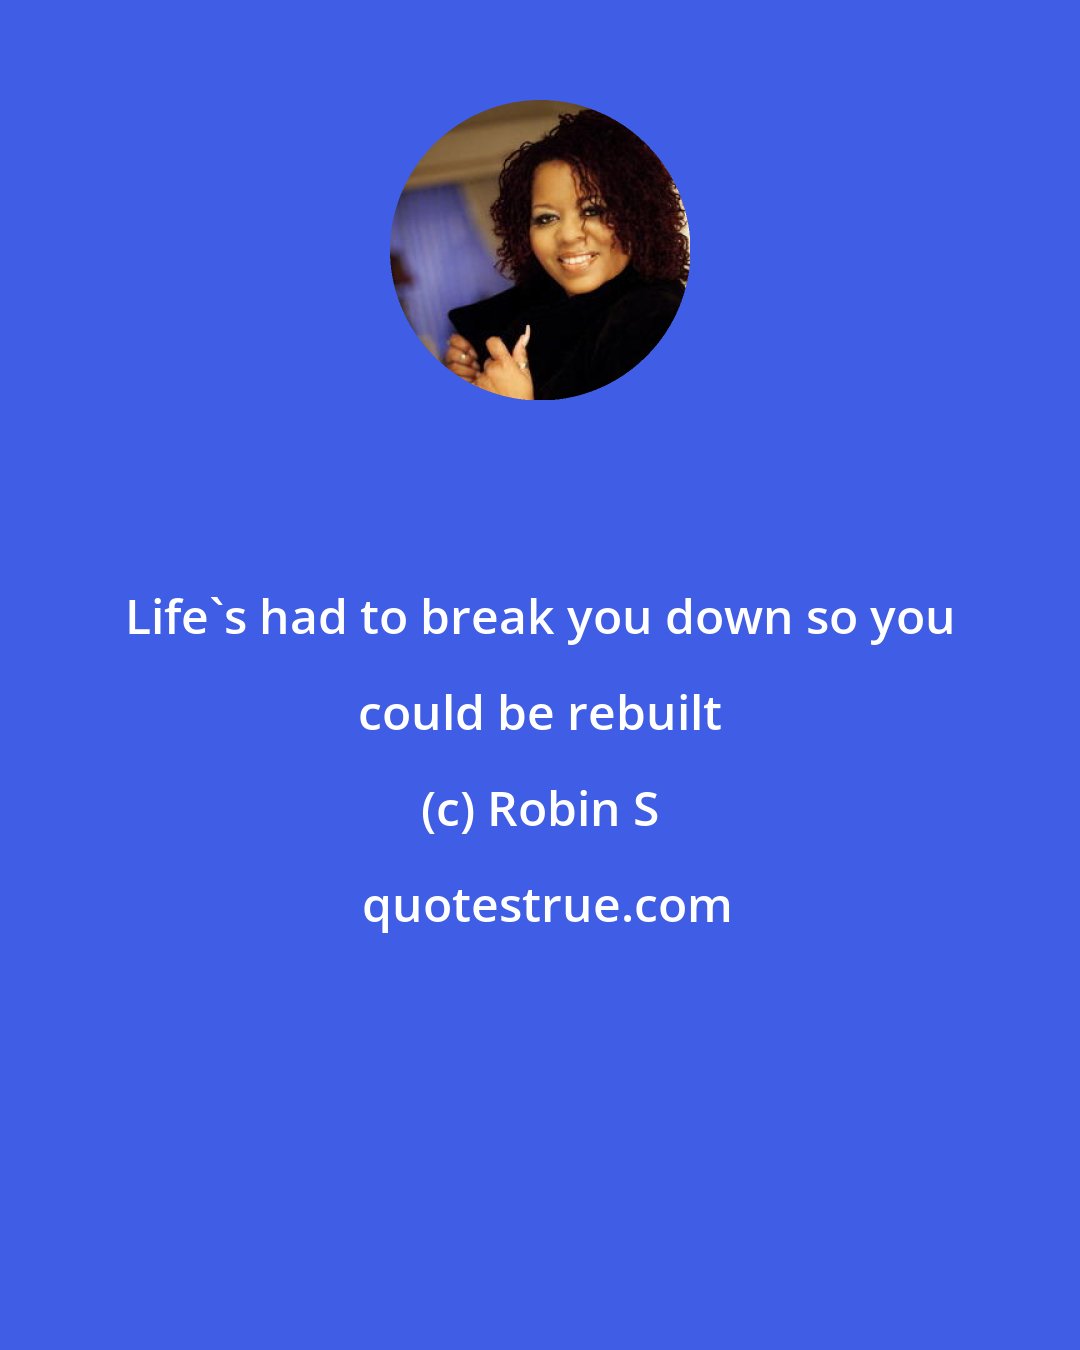 Robin S: Life's had to break you down so you could be rebuilt